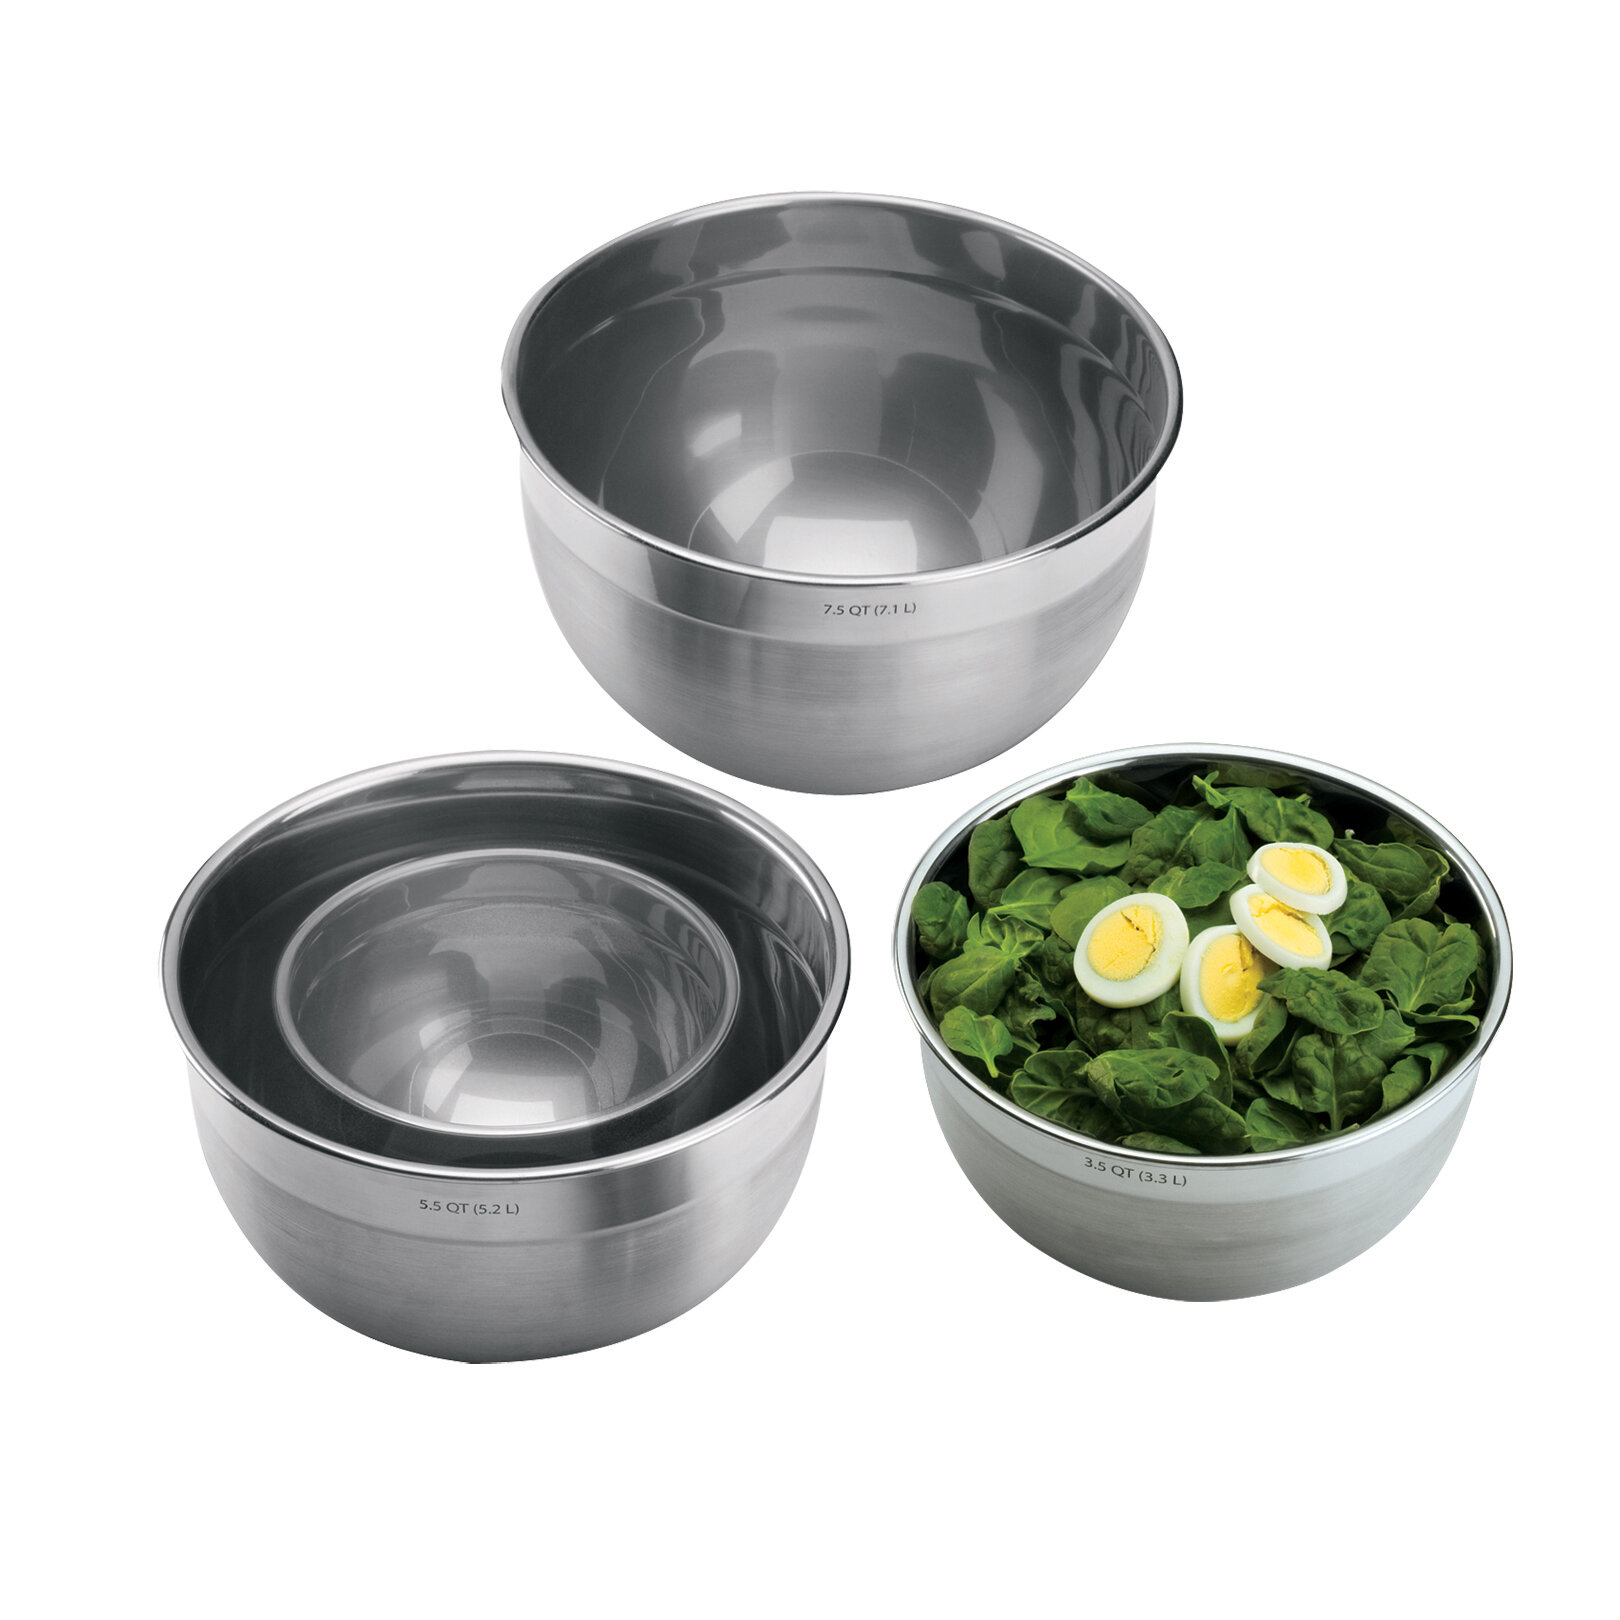 Mixing Bowls with Lids for Kitchen - 26 PCS Stainless Steel Nesting  Colorful Mixing Bowls Set for Baking,Mixing,Serving & Prepping,Size 7, 5.5,  5, 4